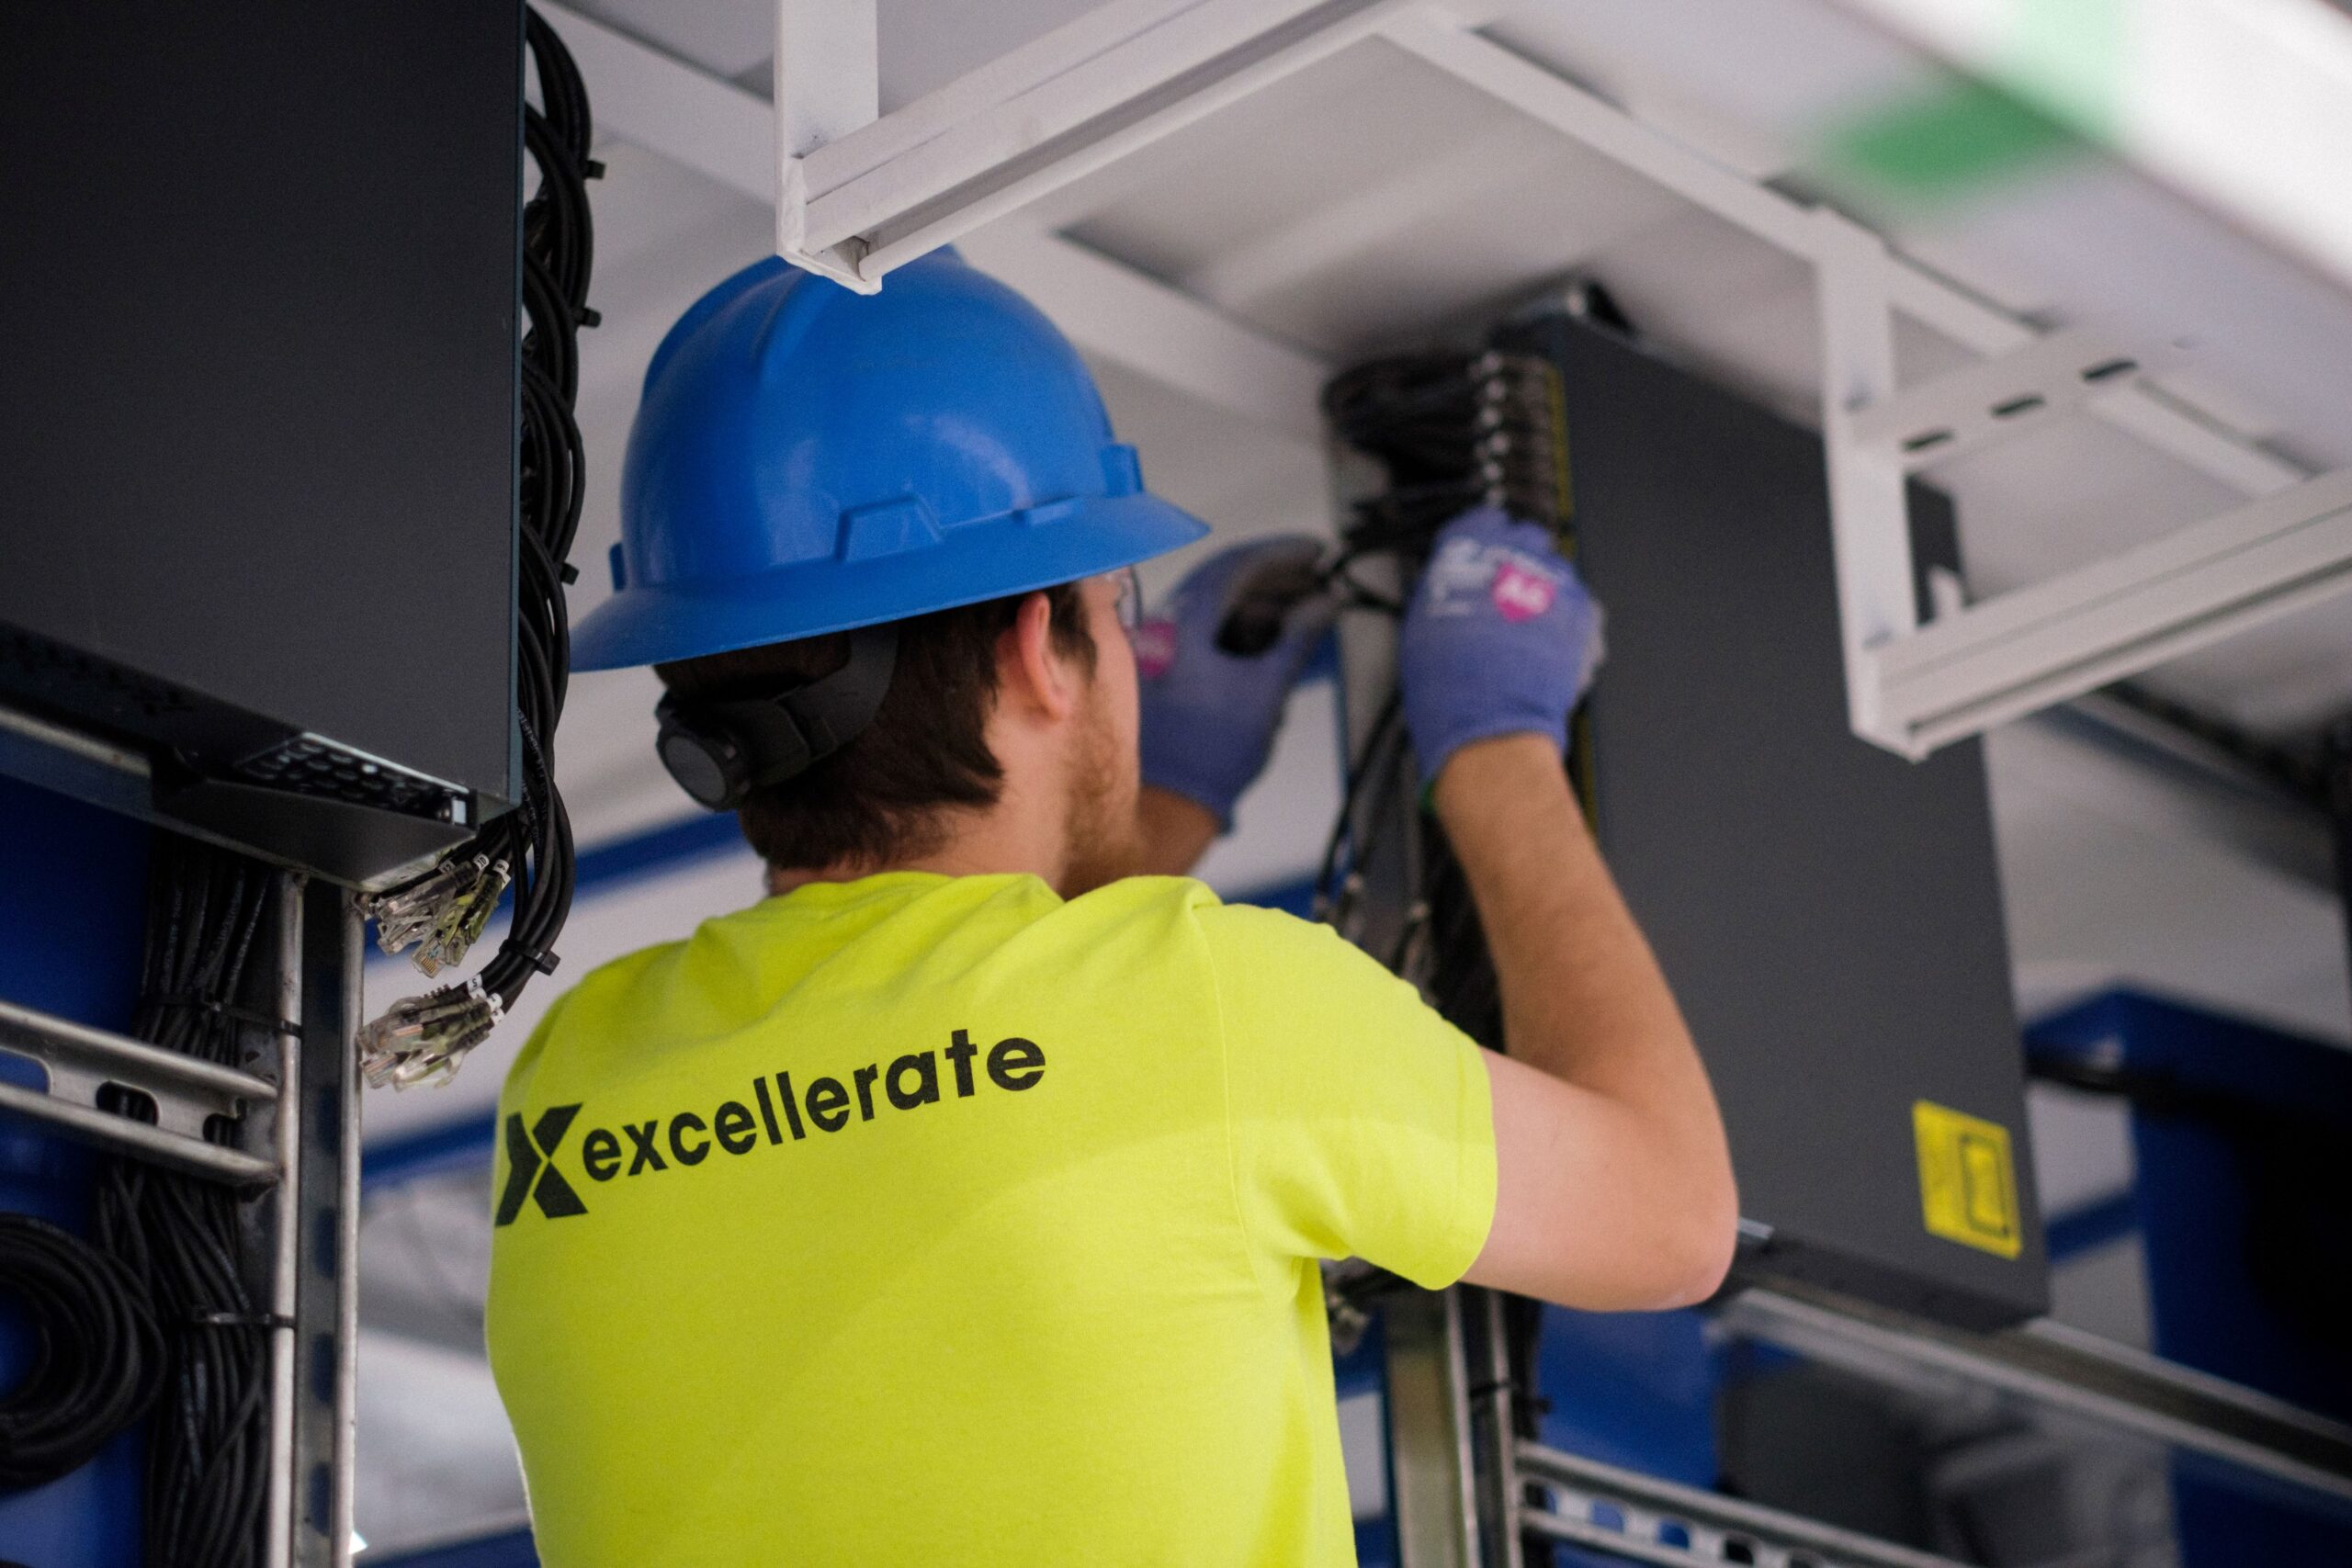 Excellerate Electrician Working